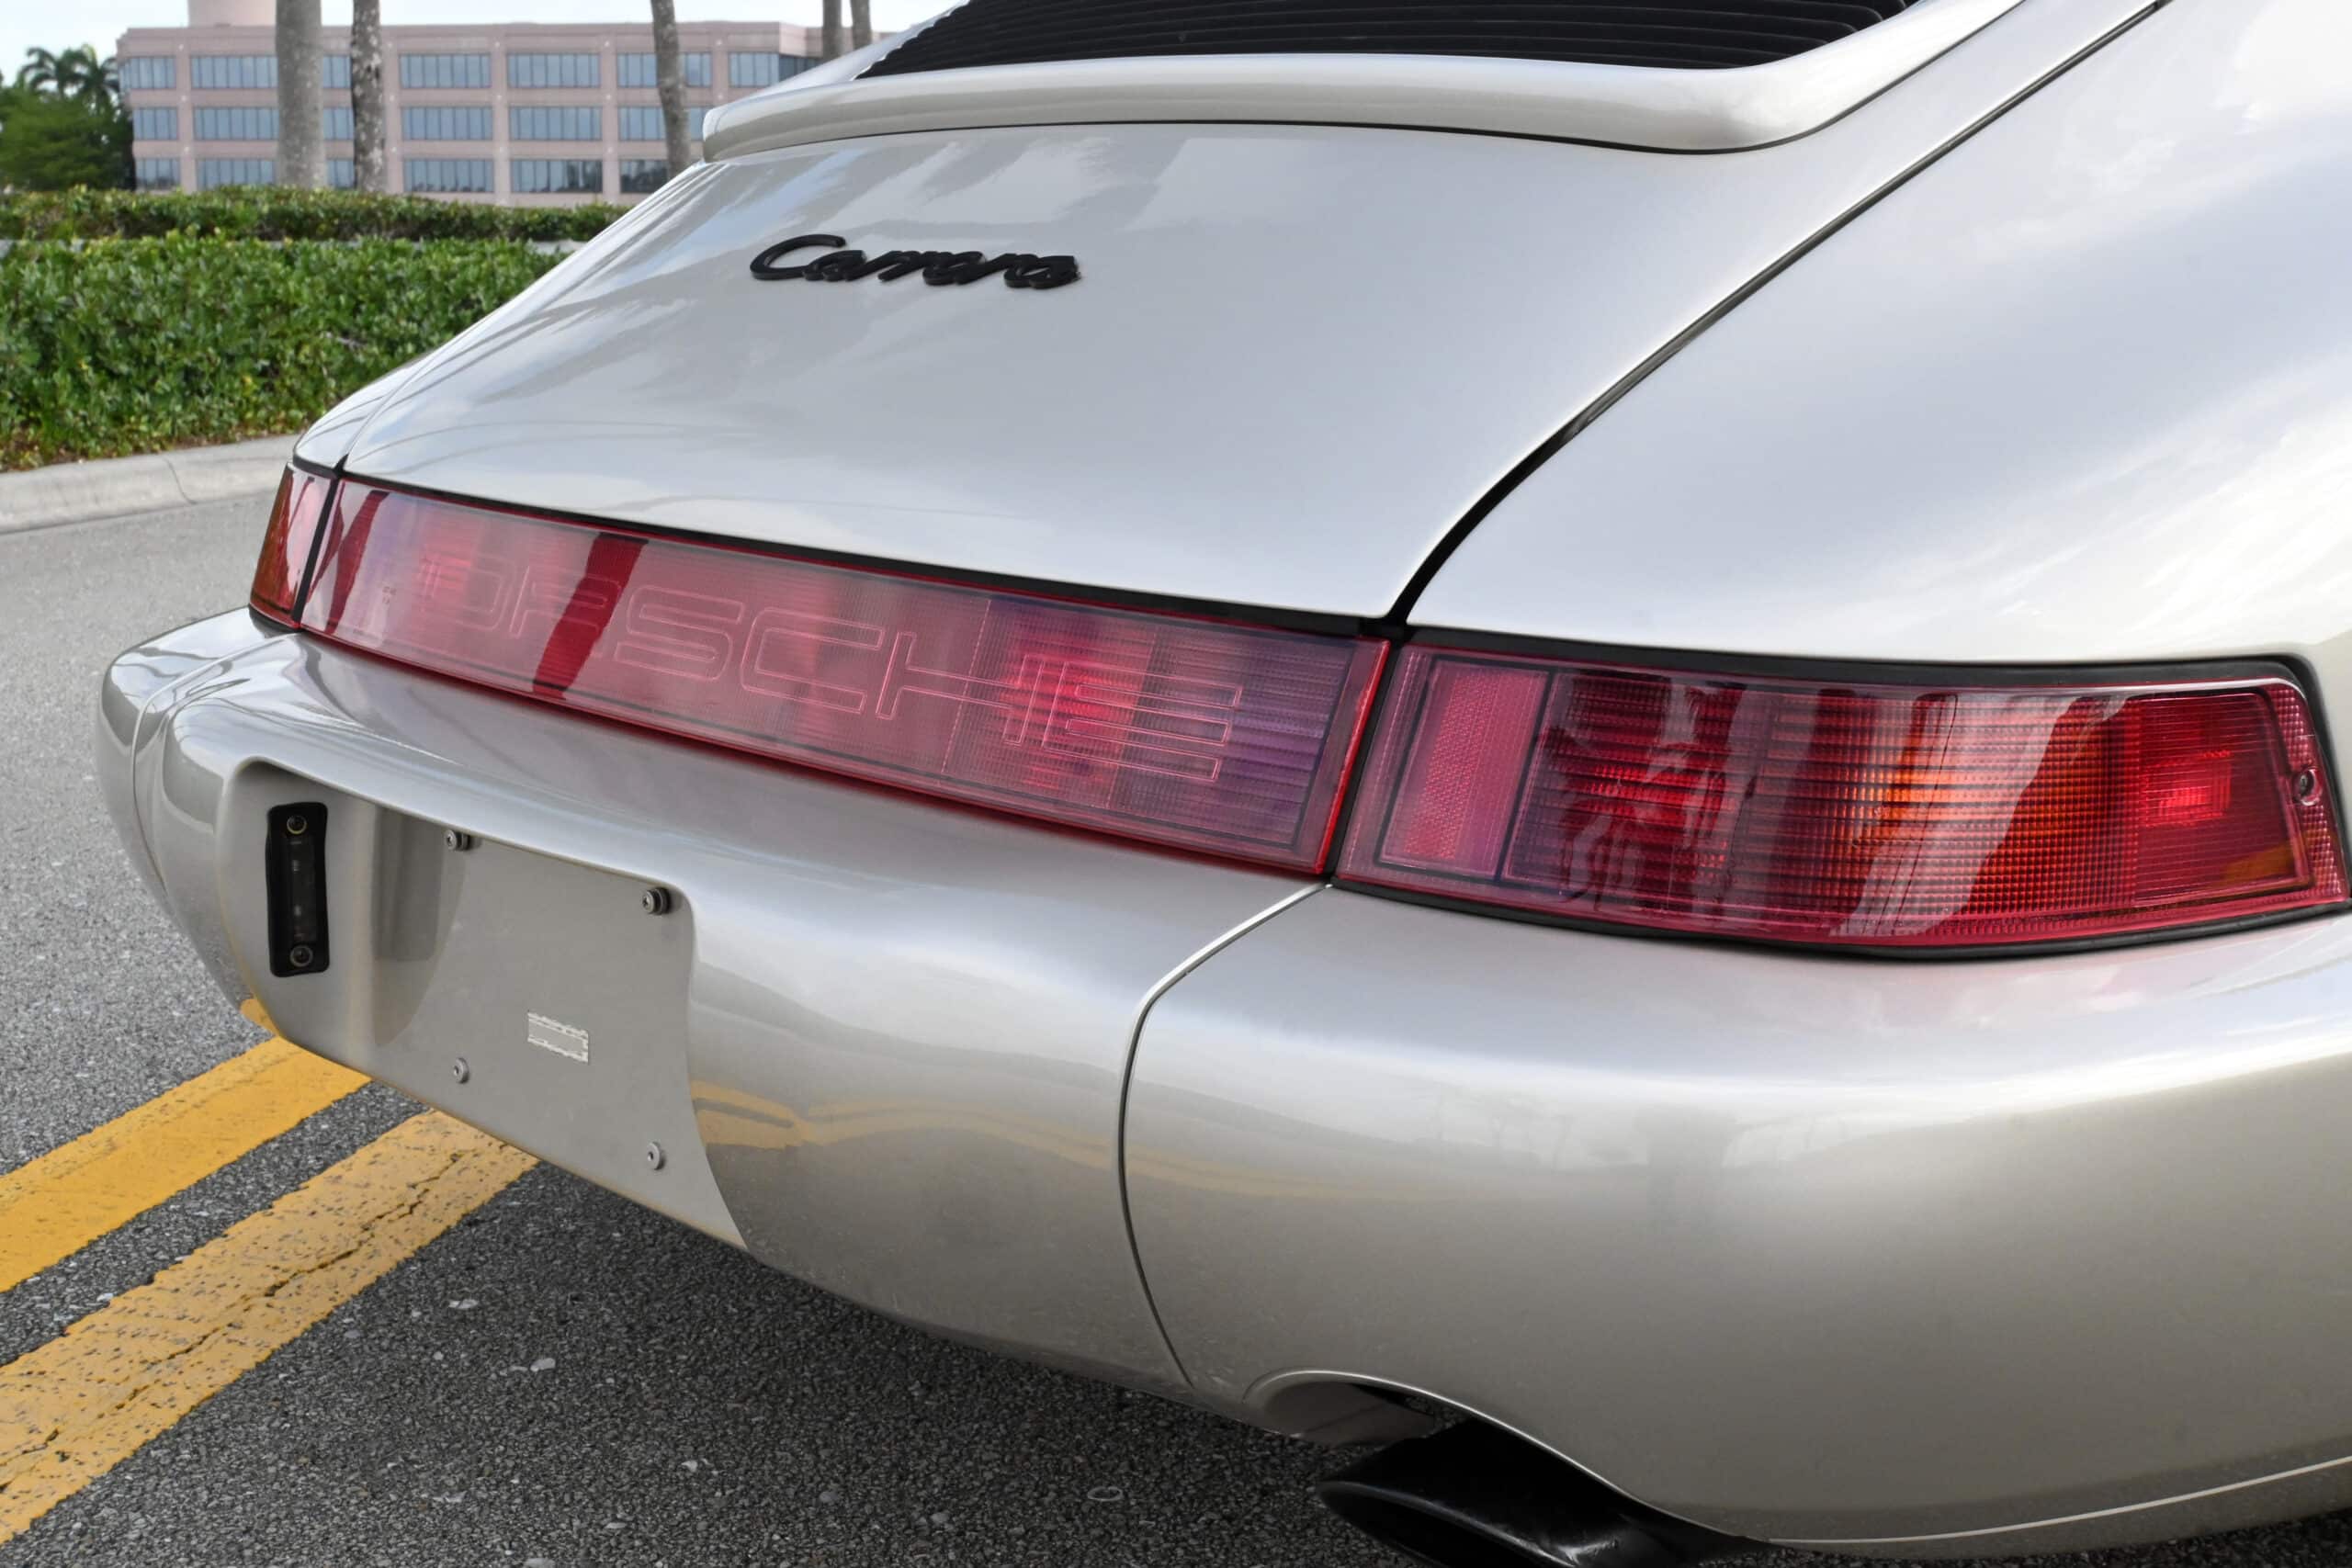 1989 964 Carrera 4 – One Owner with only 47,000 actual miles Rare Linen Gray Metallic| Outstanding Quality